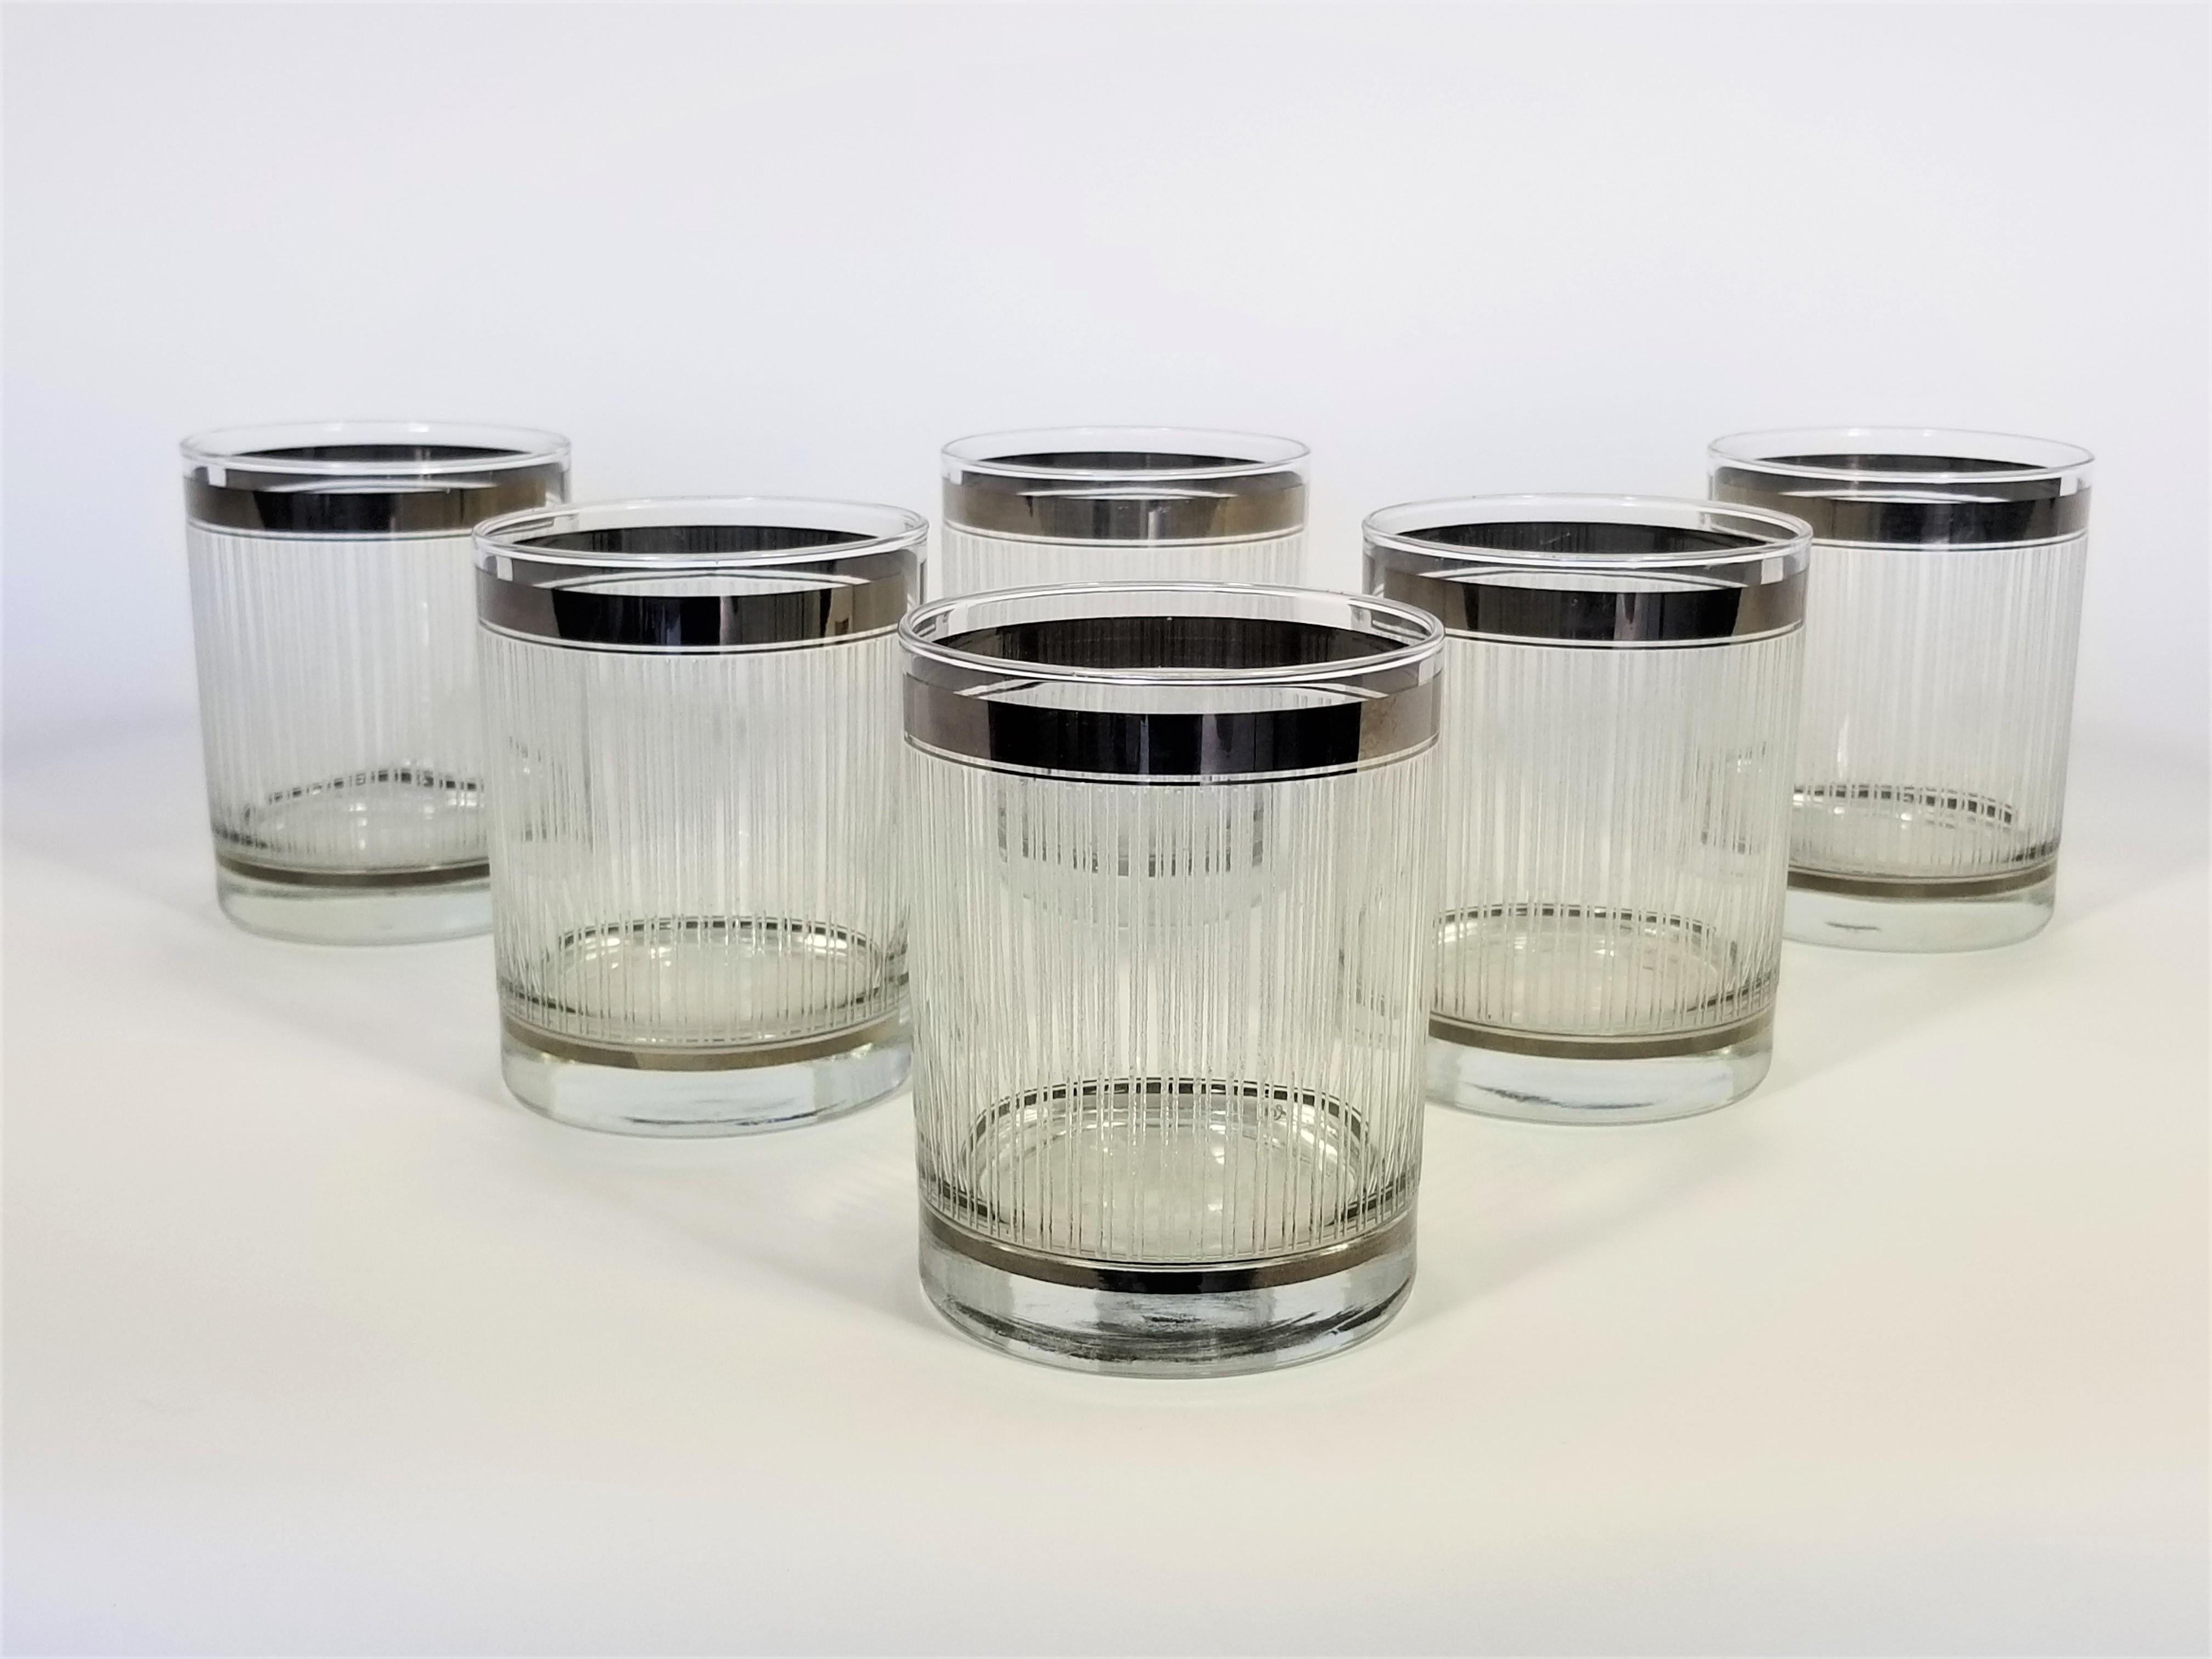 Stunning set of 6 midcentury Georges Briard glasses. Silver trim on top and bottom attributed to Dorothy Thorpe. All glasses are signed. Perfect cocktail size to fit well in your hand. Beautiful addition to any bar. Excellent condition.